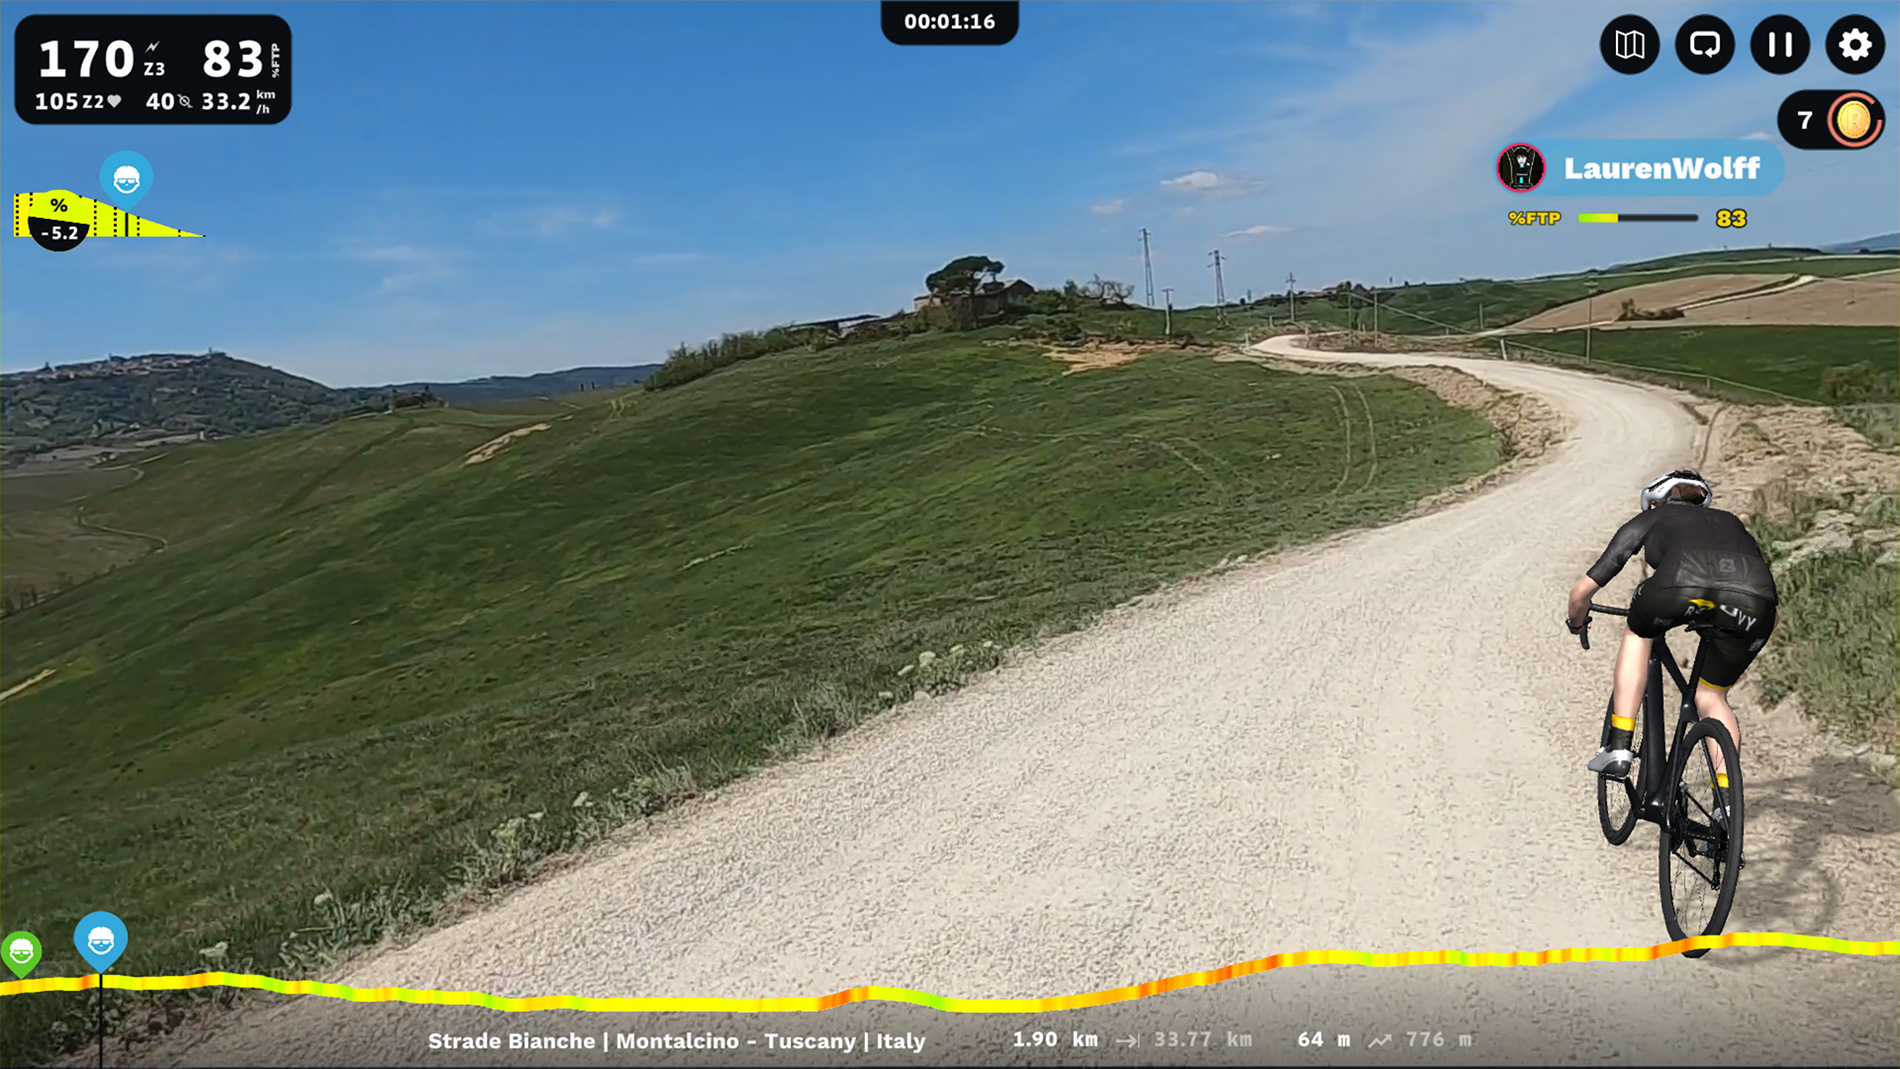 Tackling the technical, hilly and dusty gravel roads of Strade Bianche on the ROUVY app